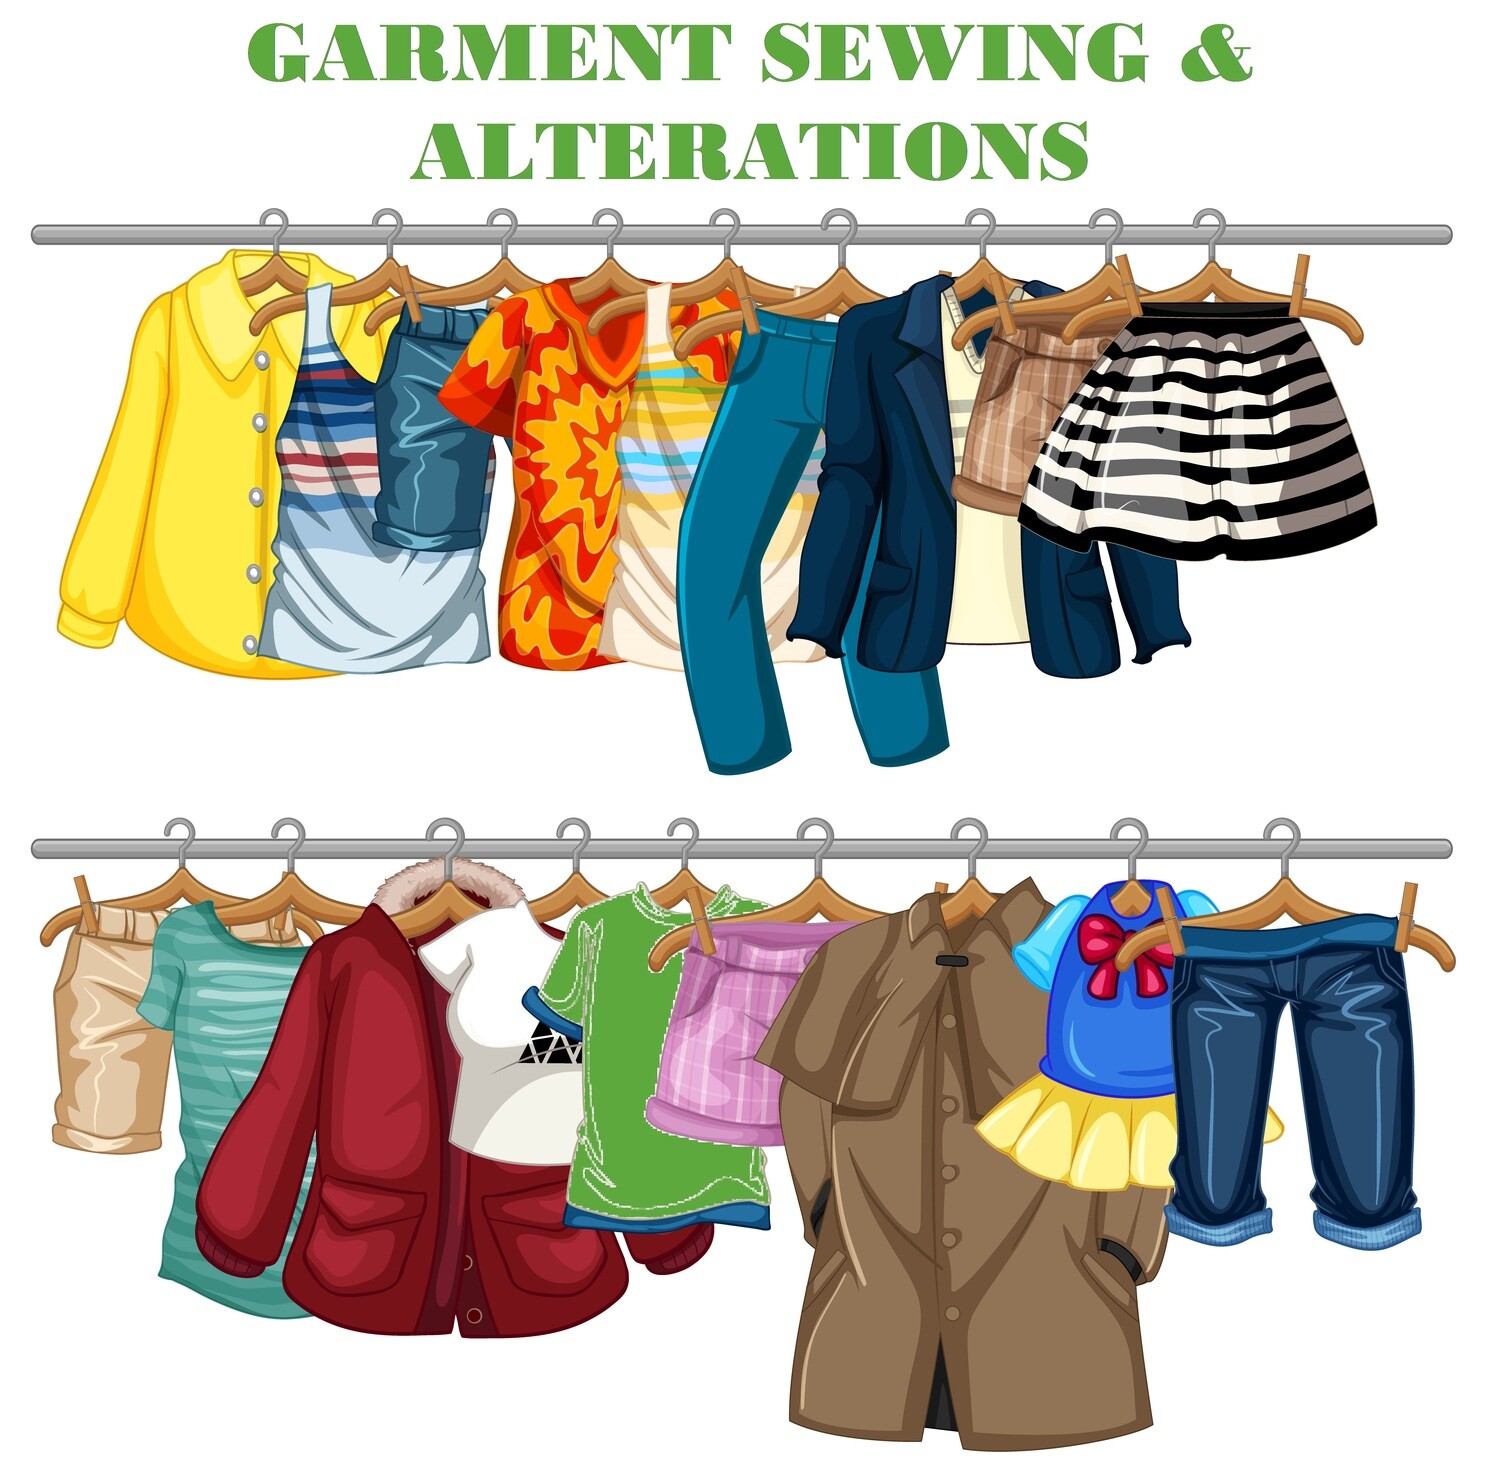 GARMENT SEWING & ALTERATIONS
$50.00 + HST (each)
Thursday November 16th, 10:30 am - 4:30 pm